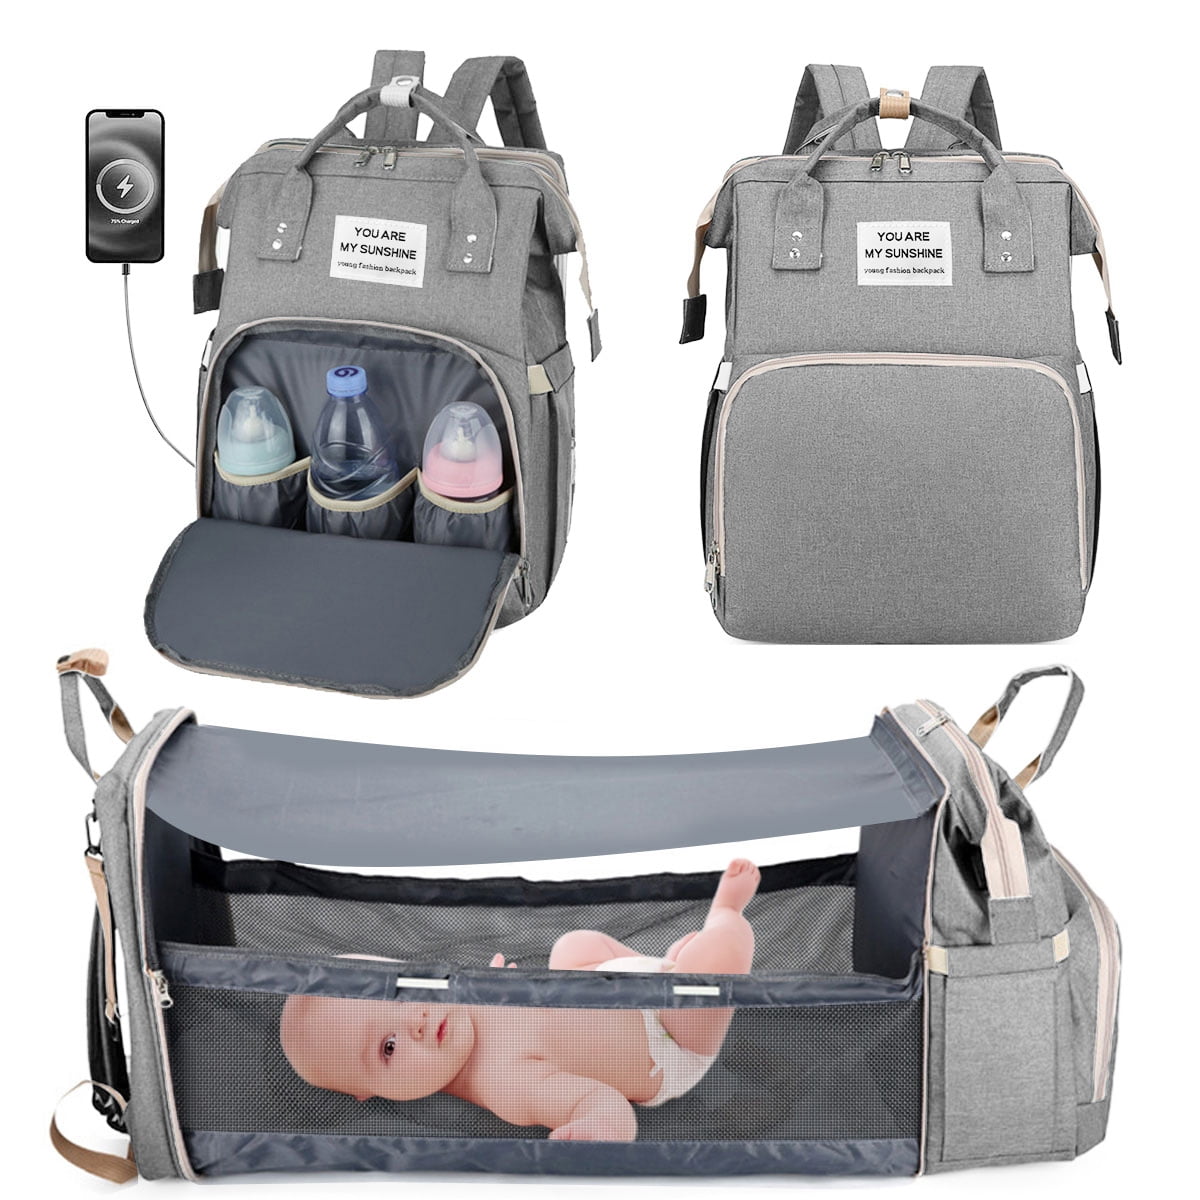 Waterproof and Stylish Diaper Bag Backpack WiseWater Multifunction Travel Back Pack Maternity Baby Changing Bags Large Capacity Maternity Nappy Bag with USB Grey 